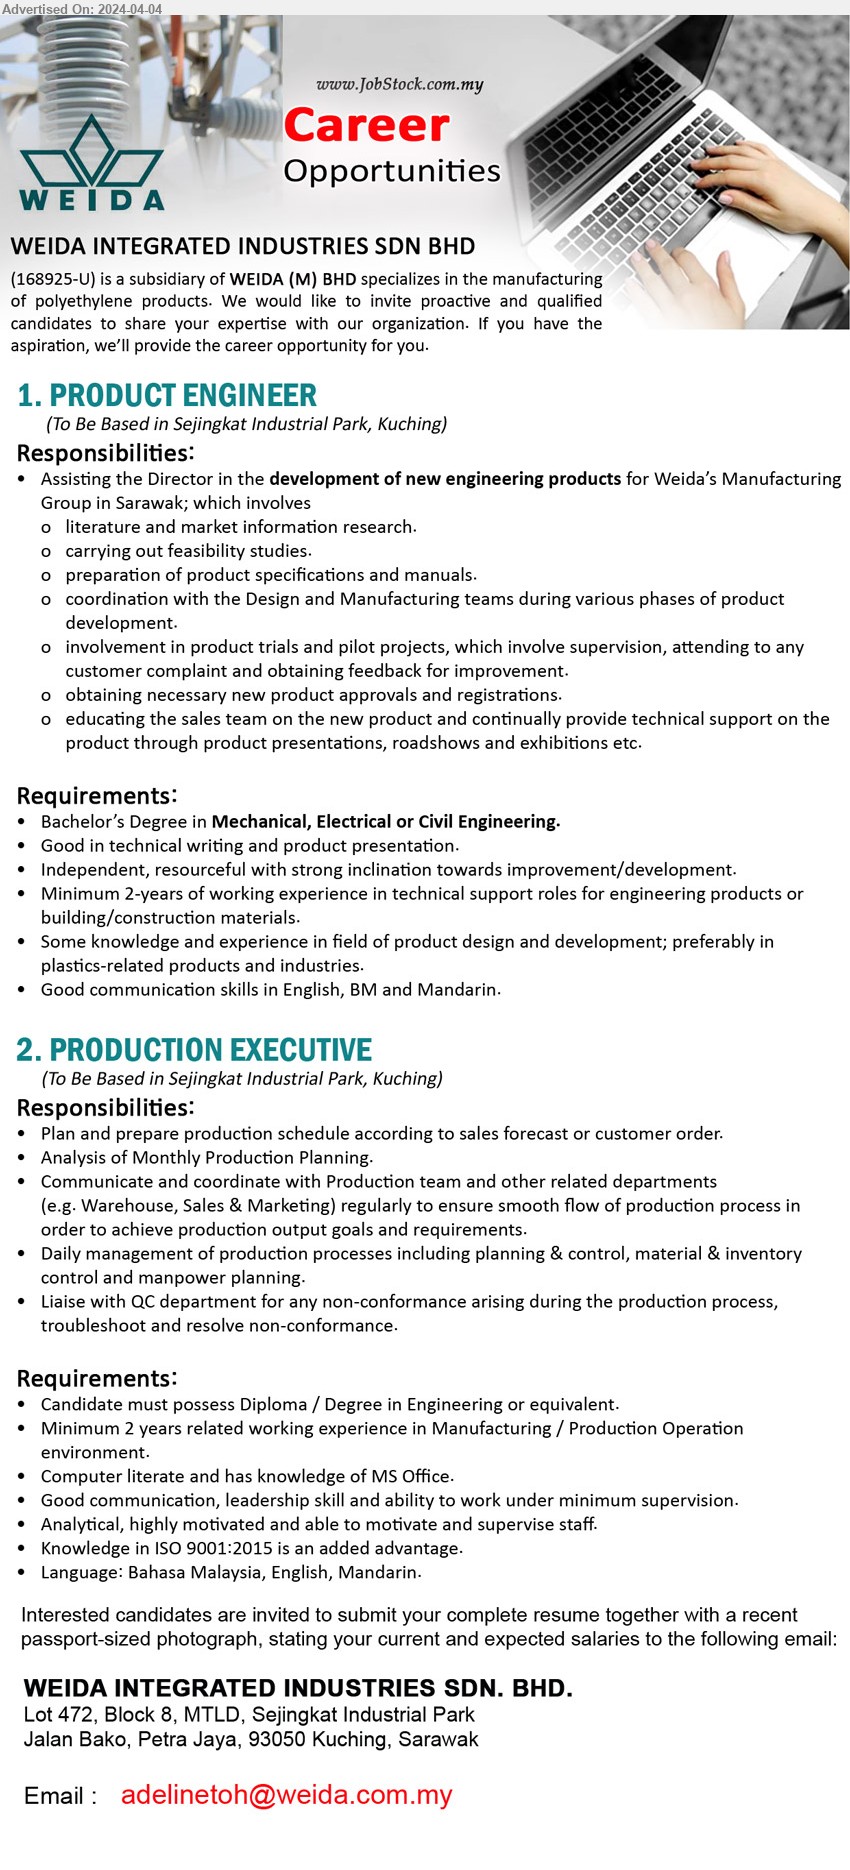 WEIDA INTEGRATED INDUSTRIES SDN BHD - 1. PRODUCT ENGINEER  (Kuching), Bachelor’s Degree in Mechanical, Electrical or Civil Engineering,  2-years of working experience in technical support roles for engineering products or building/construction materials,...
2. PRODUCTION EXECUTIVE (Kuching), s Diploma / Degree in Engineering, 2 years related working experience in Manufacturing / Production Operation,...
Email resume to ....